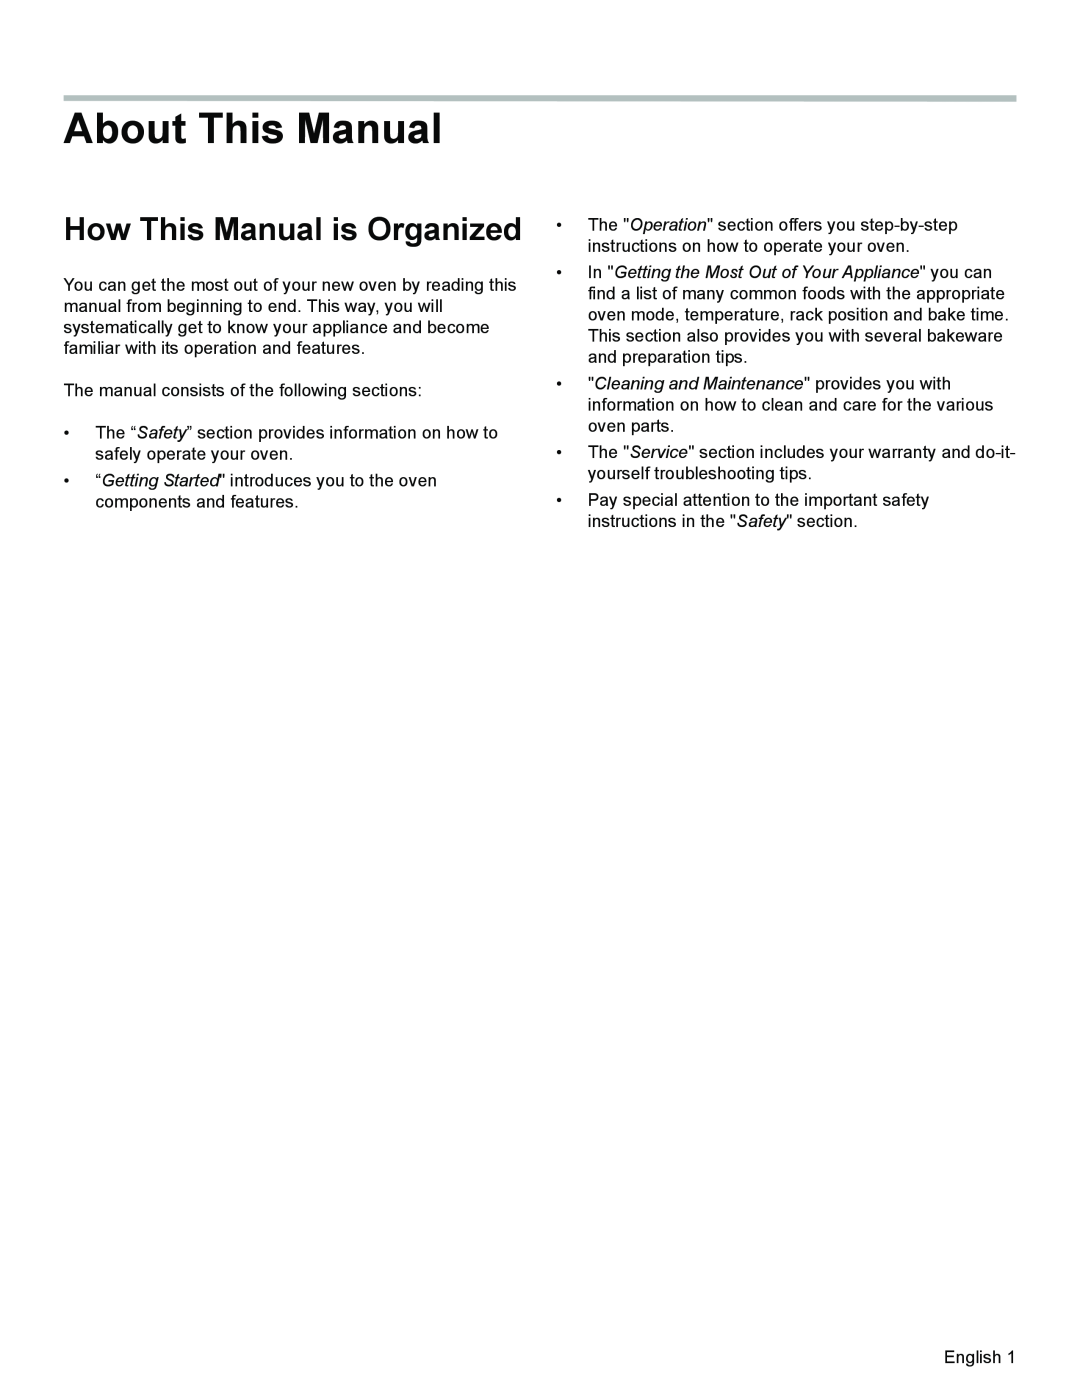 Bosch Appliances HGS3023UC manual About This Manual, How This Manual is Organized 